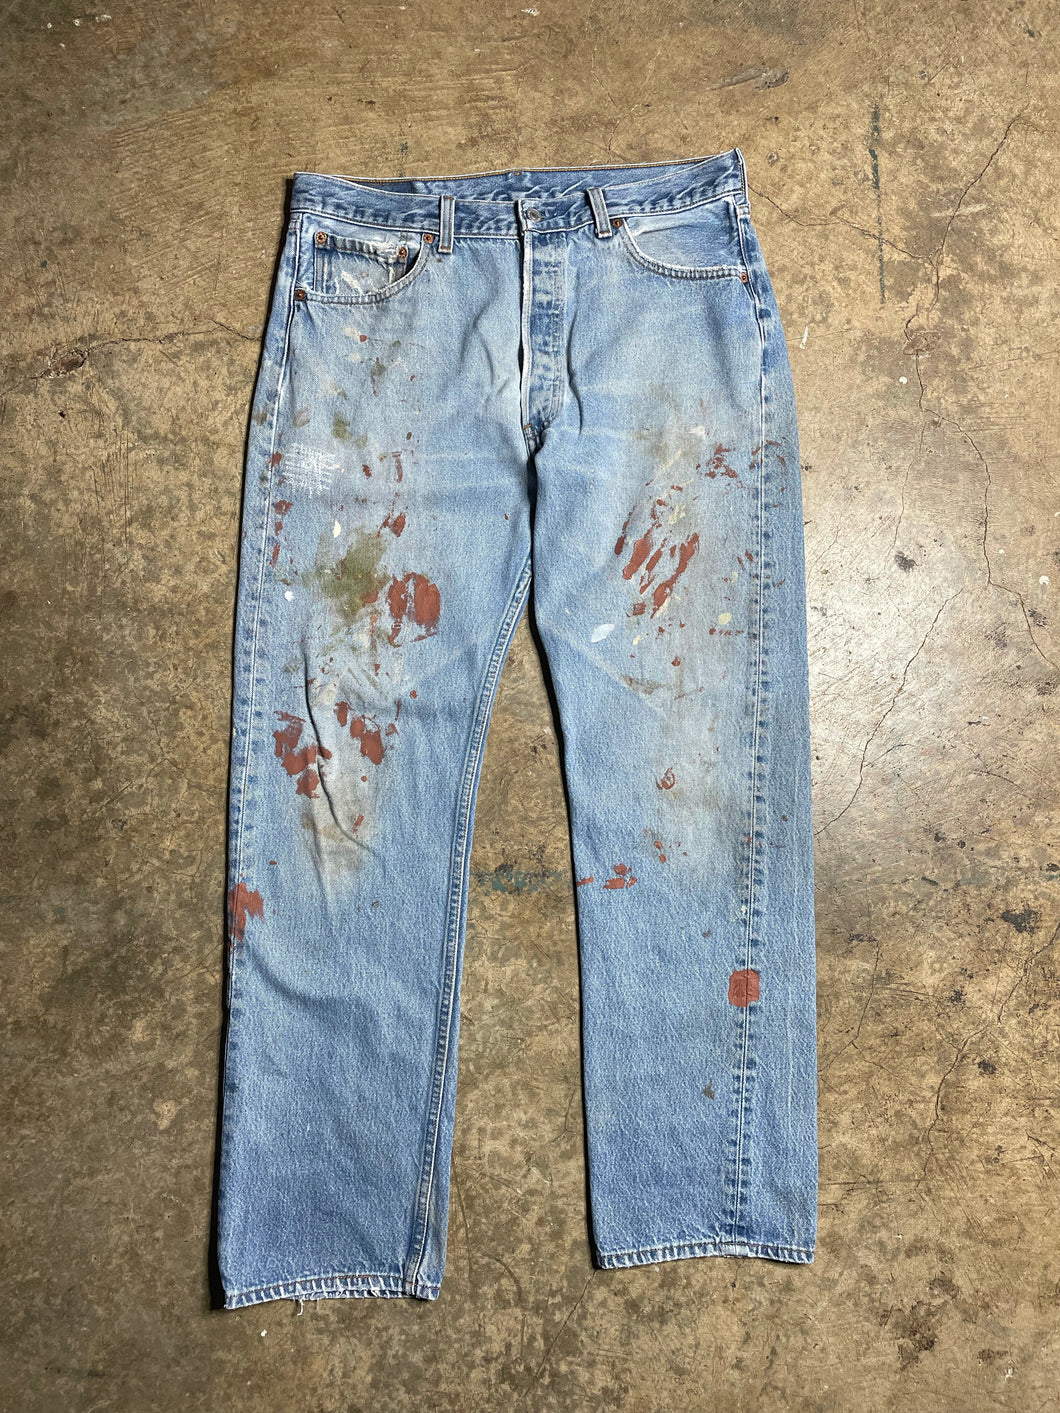 90’s Levis 501XX Paint and Repairs - 34x31.5